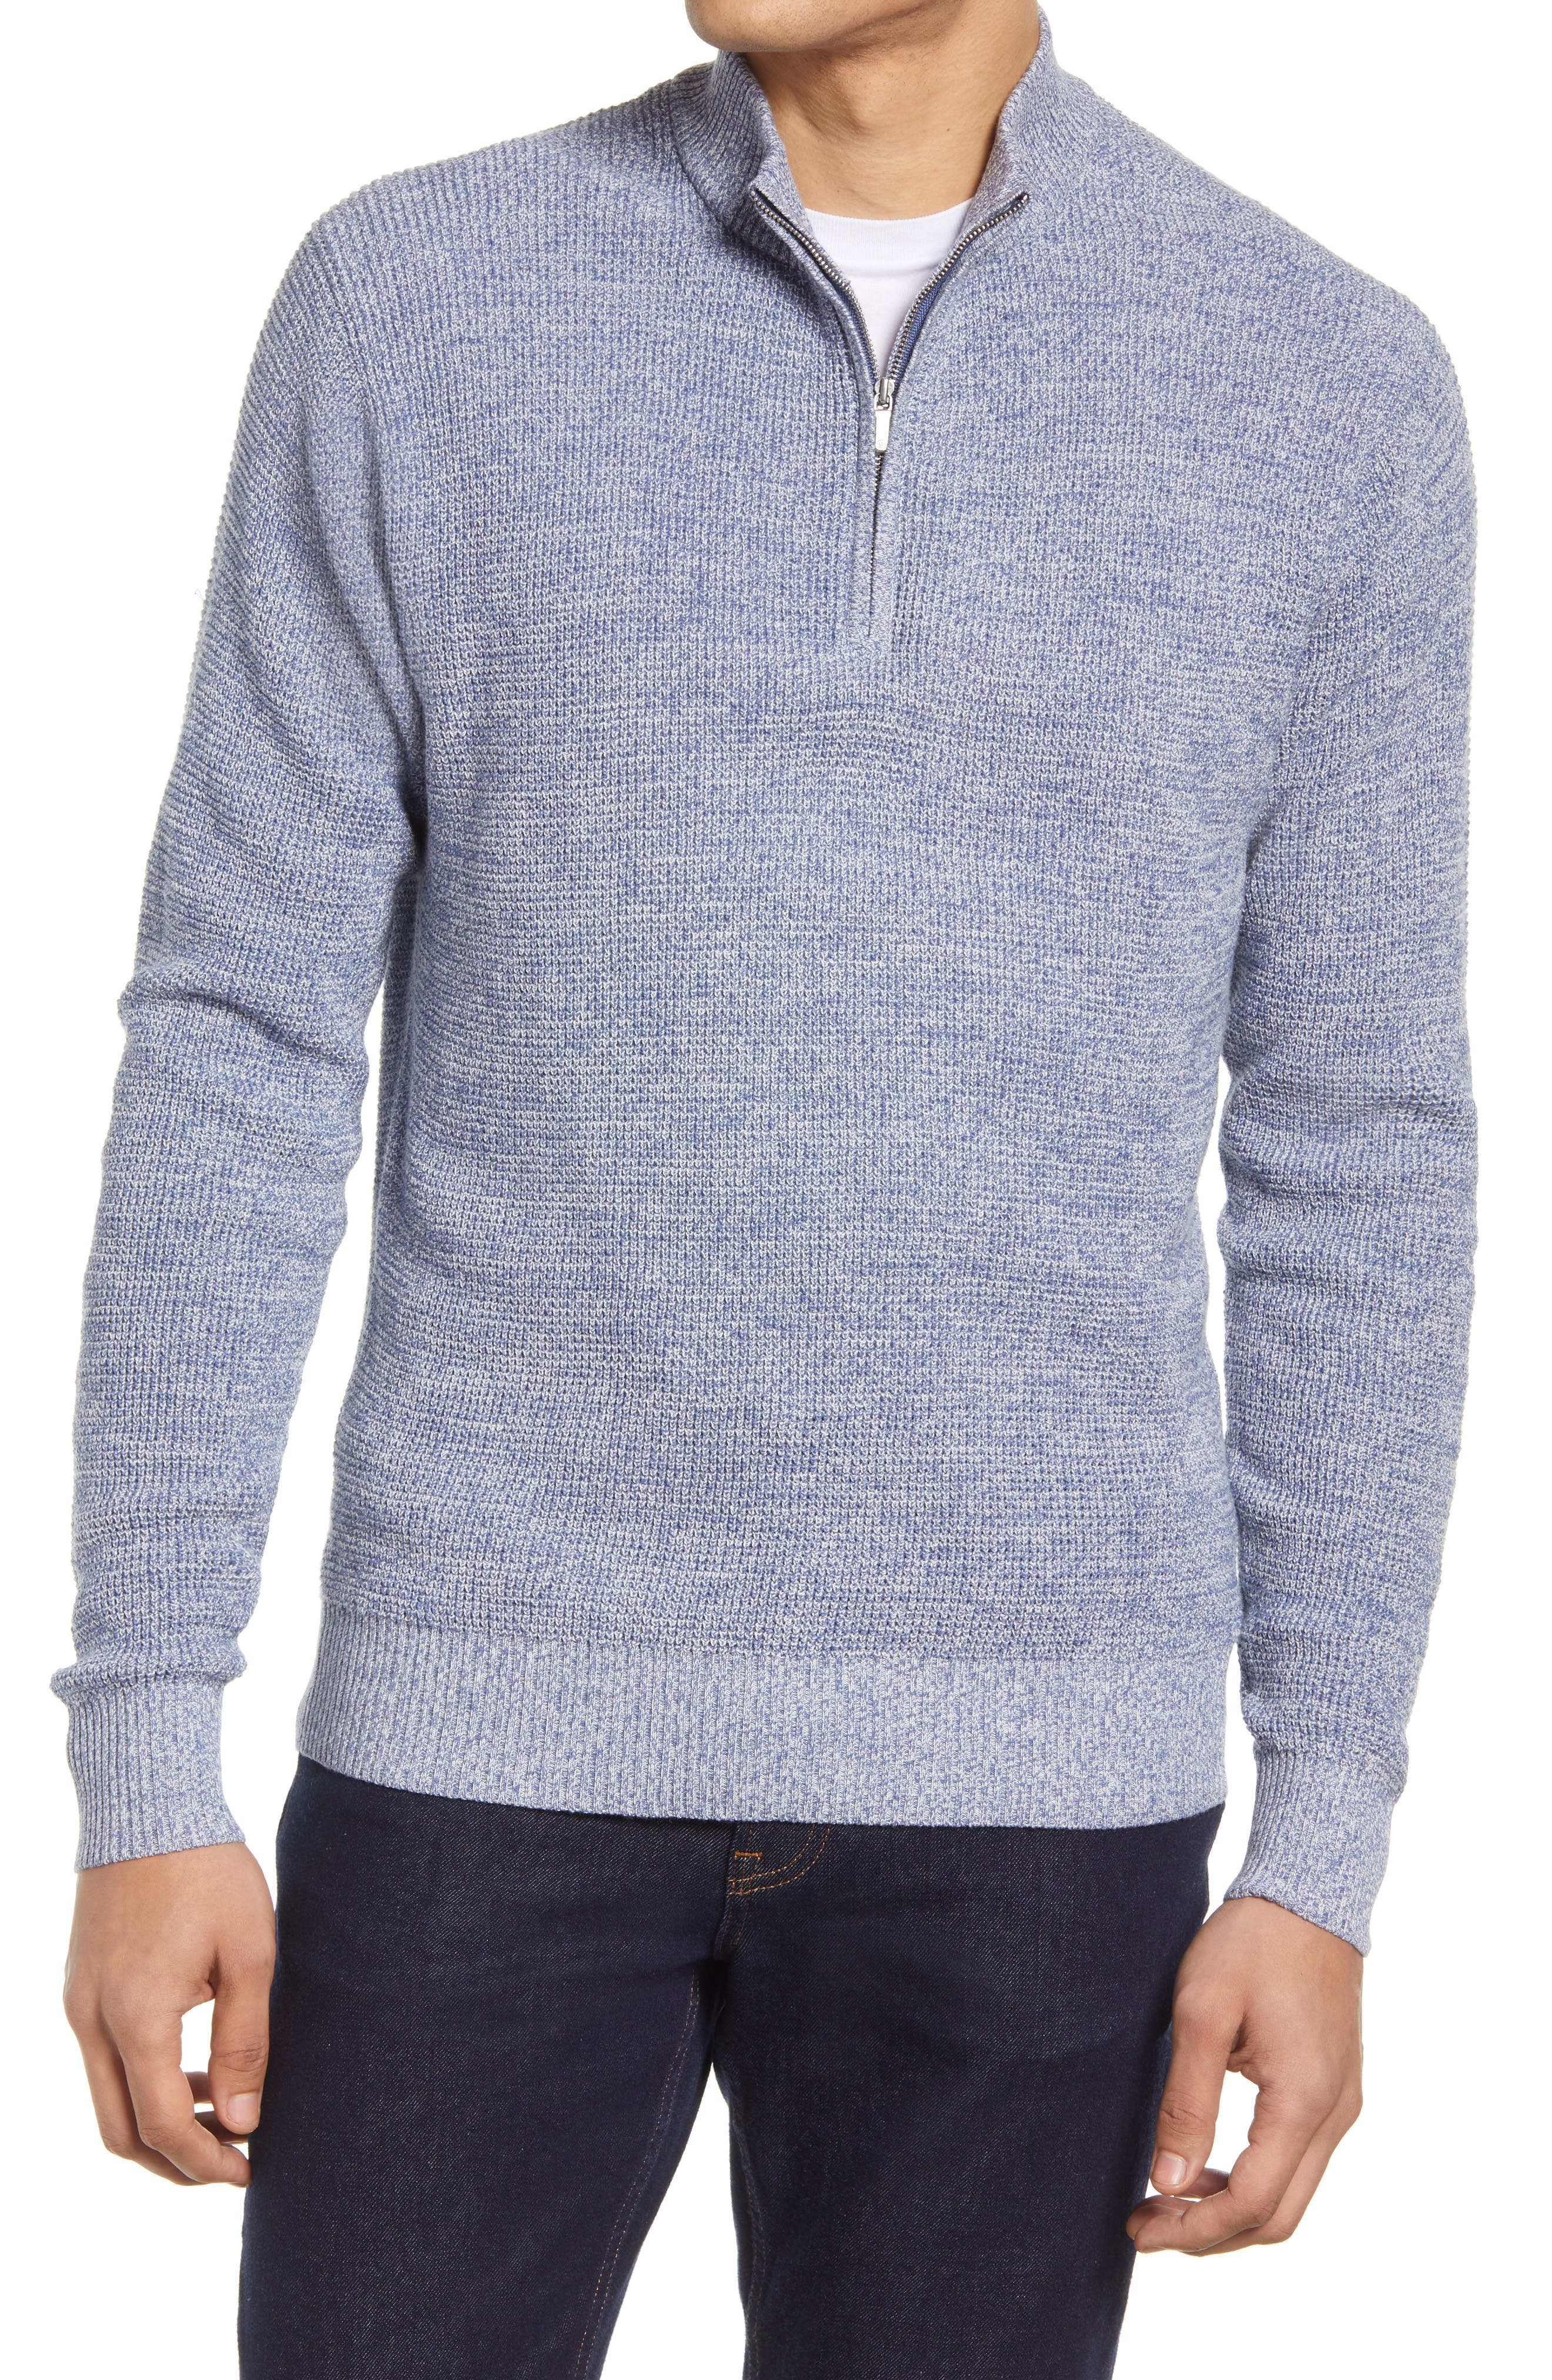 SportsX Mens Chic Soft Pullover Crewneck Long-Sleeve Knitwear Sweaters 